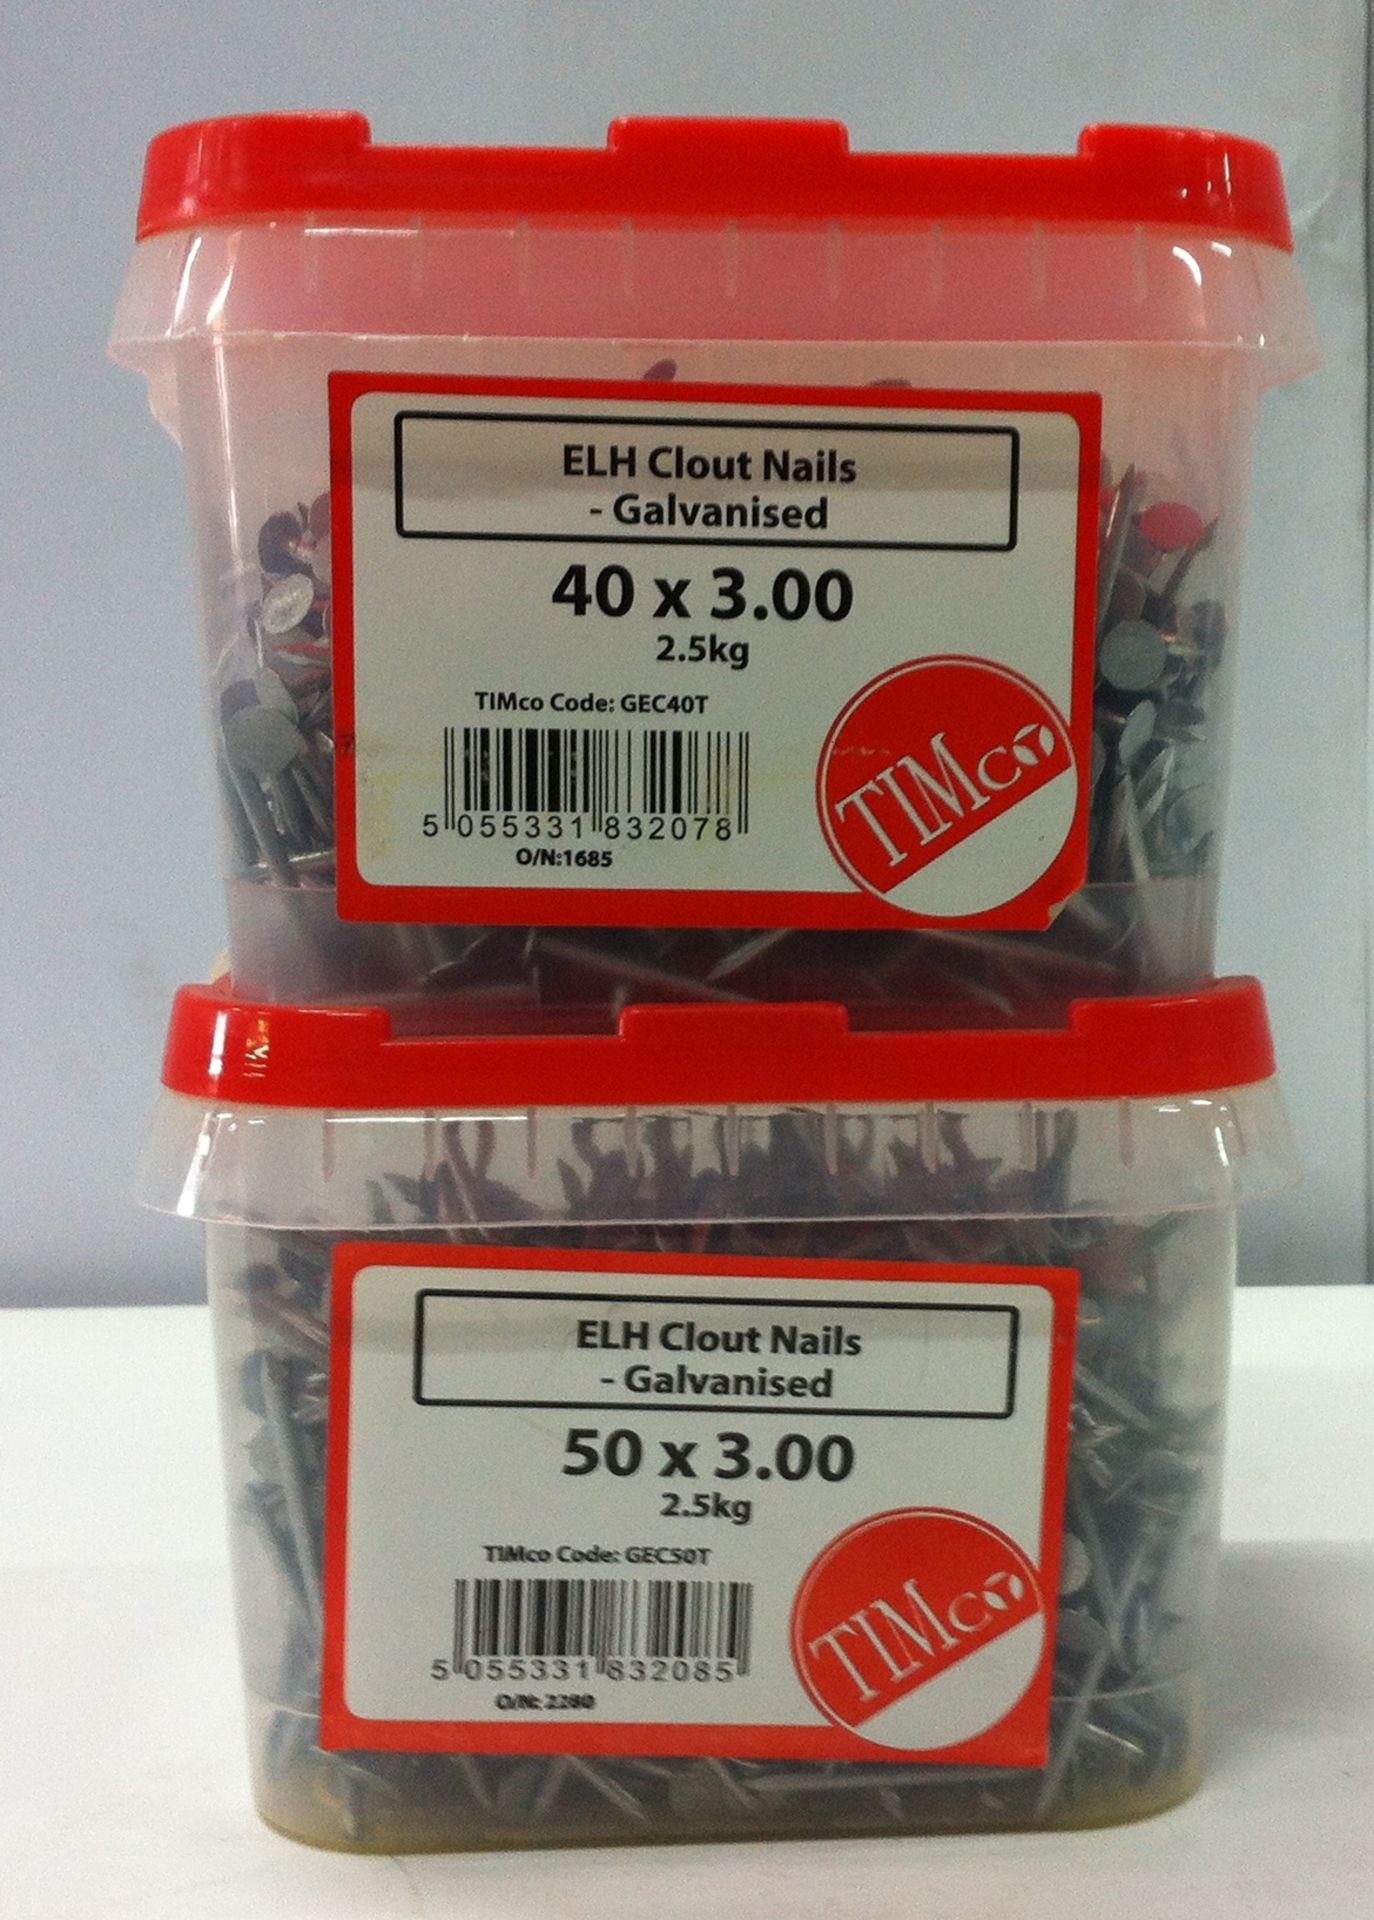 13 x 2.5kg Tubs of Timco Galvanised Clout Nails - See Description for Sizes